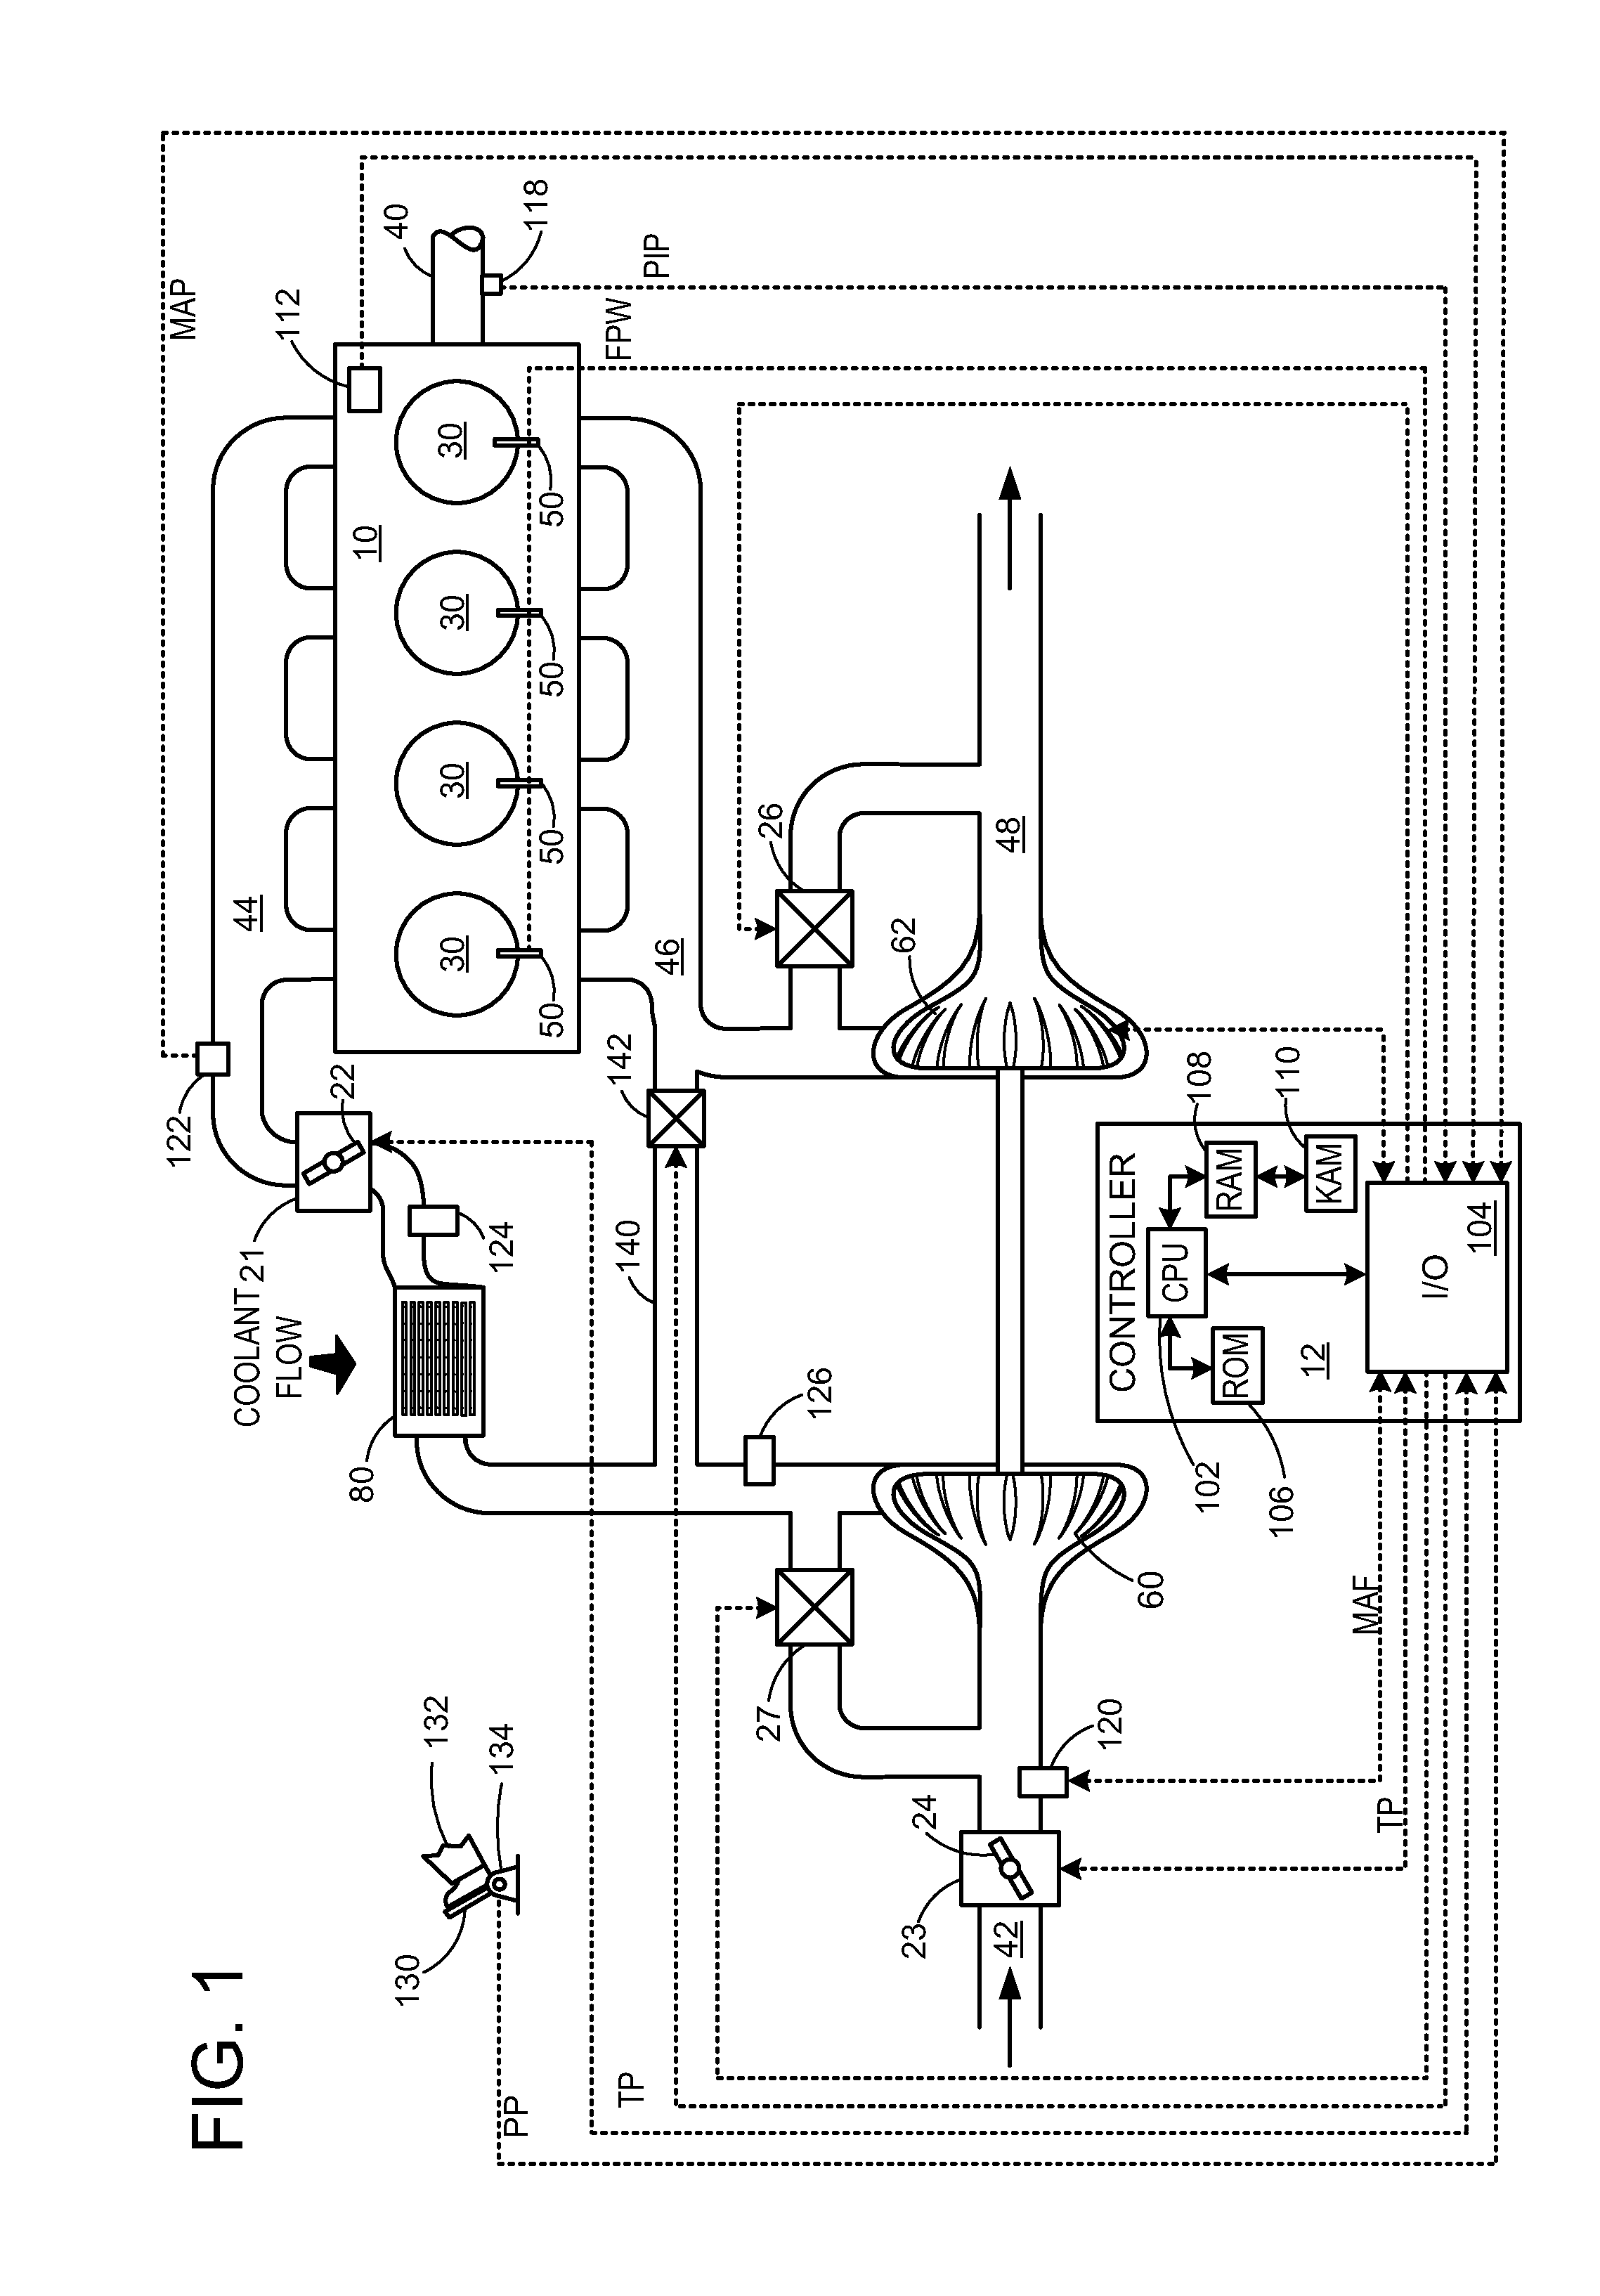 Method for controlling a variable charge air cooler